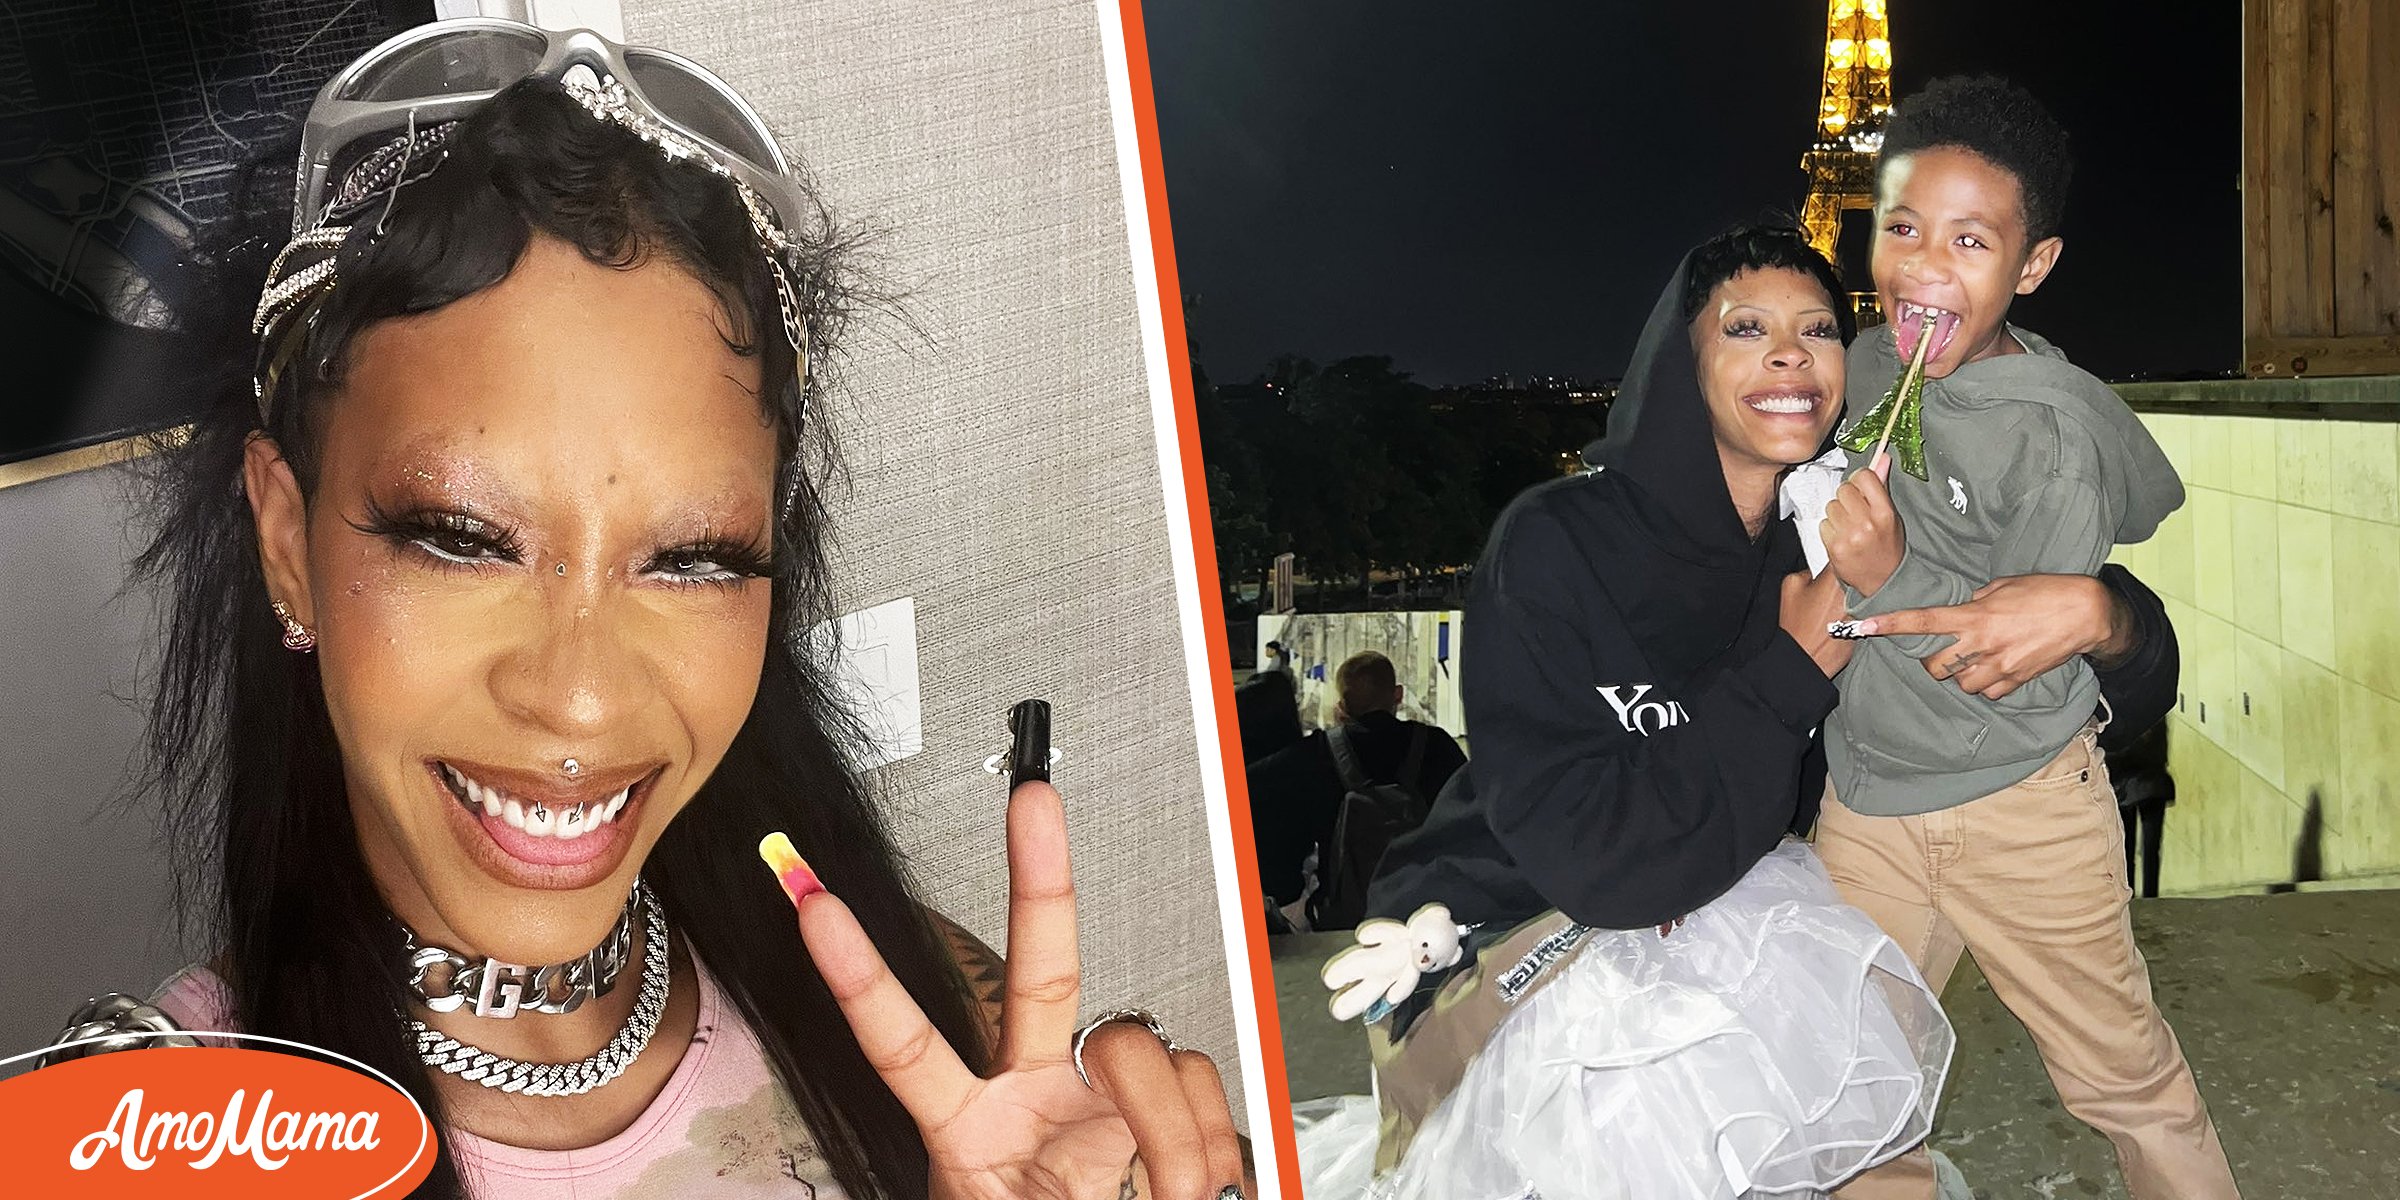 5 Facts About Rico Nasty Who Became Pregnant While In High School